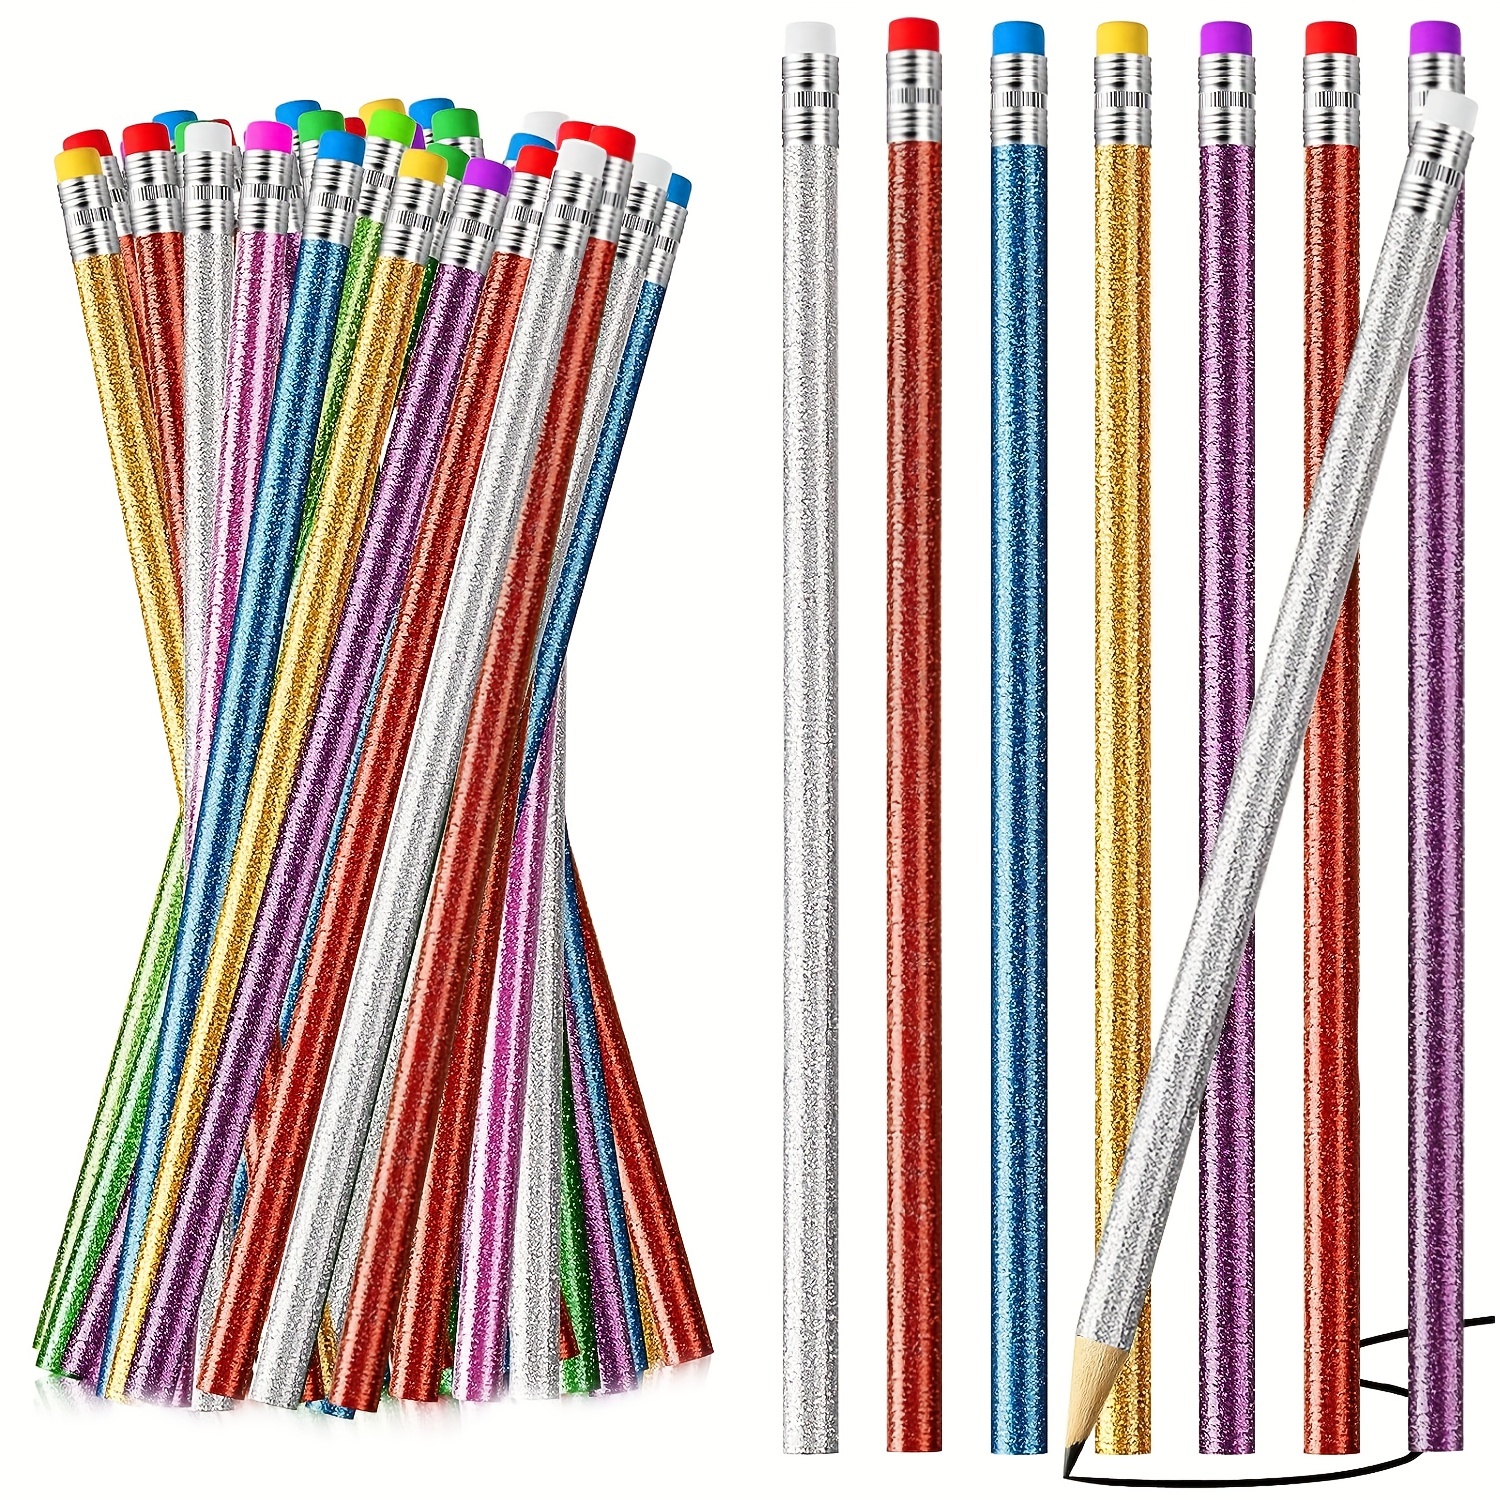 100Pcs Bendy Fun Pencils for Kids,Magic Bendable Flexible Colorful Stripe  Soft Rubber Pencils with Erasers for Classroom Gifts - AliExpress